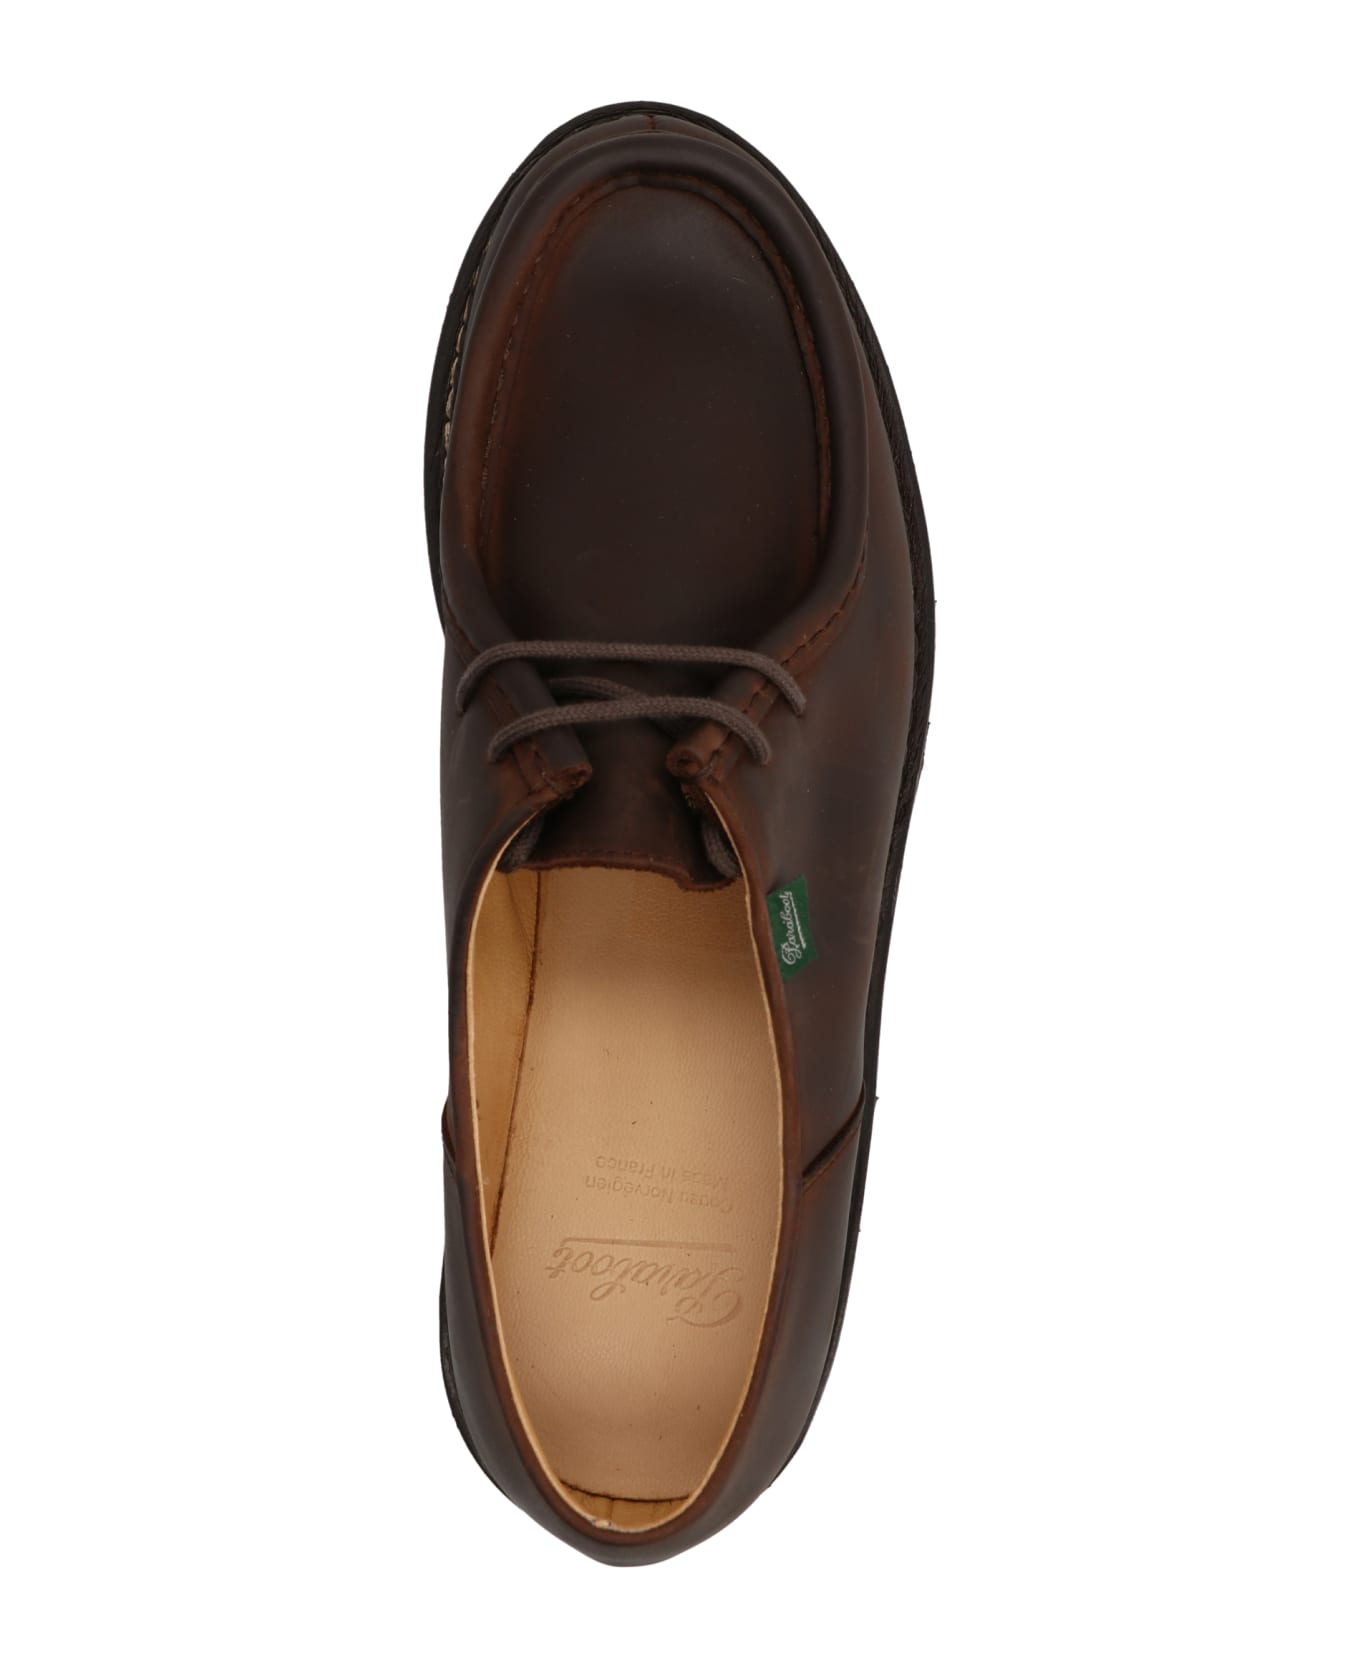 Paraboot 'michael' Derby Shoes - Brown